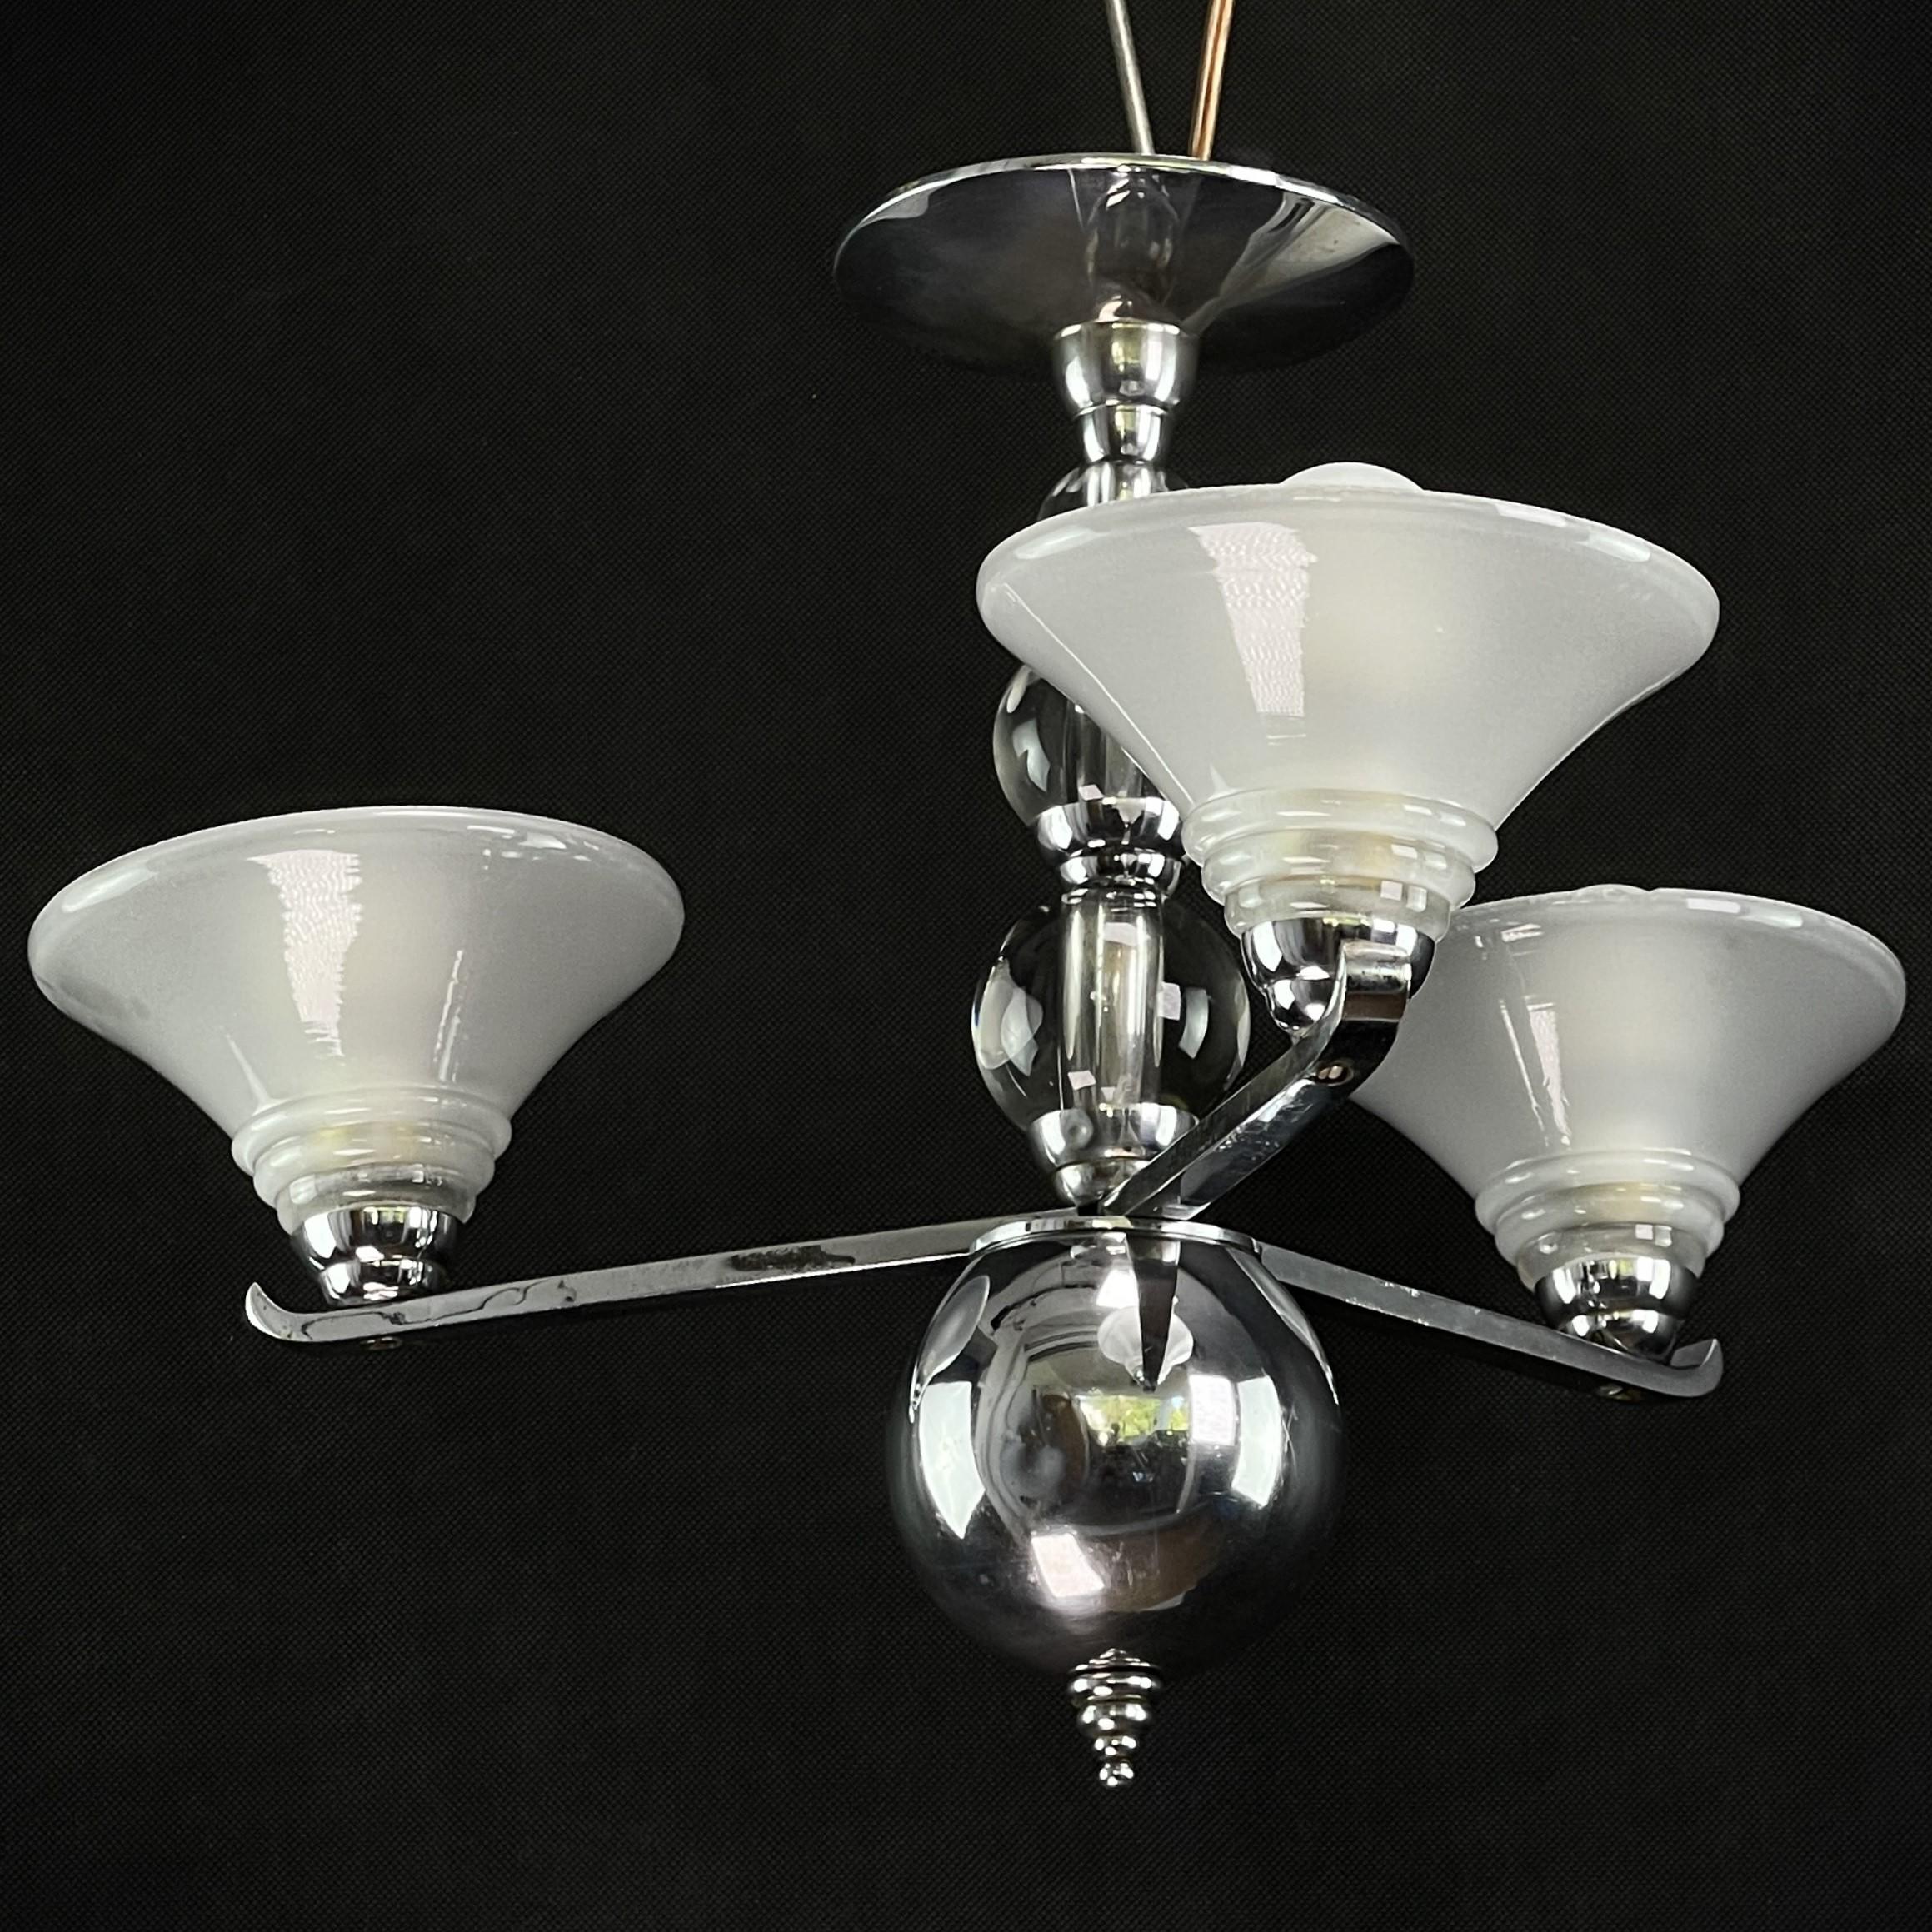 Art Deco ceiling lamp - 1920s

An art deco chandelier in the style of 1920s could have an impressive and elegant design. It is made of glass balls and chrome elements that capture the characteristic glitz and glamor of that time.
The combination